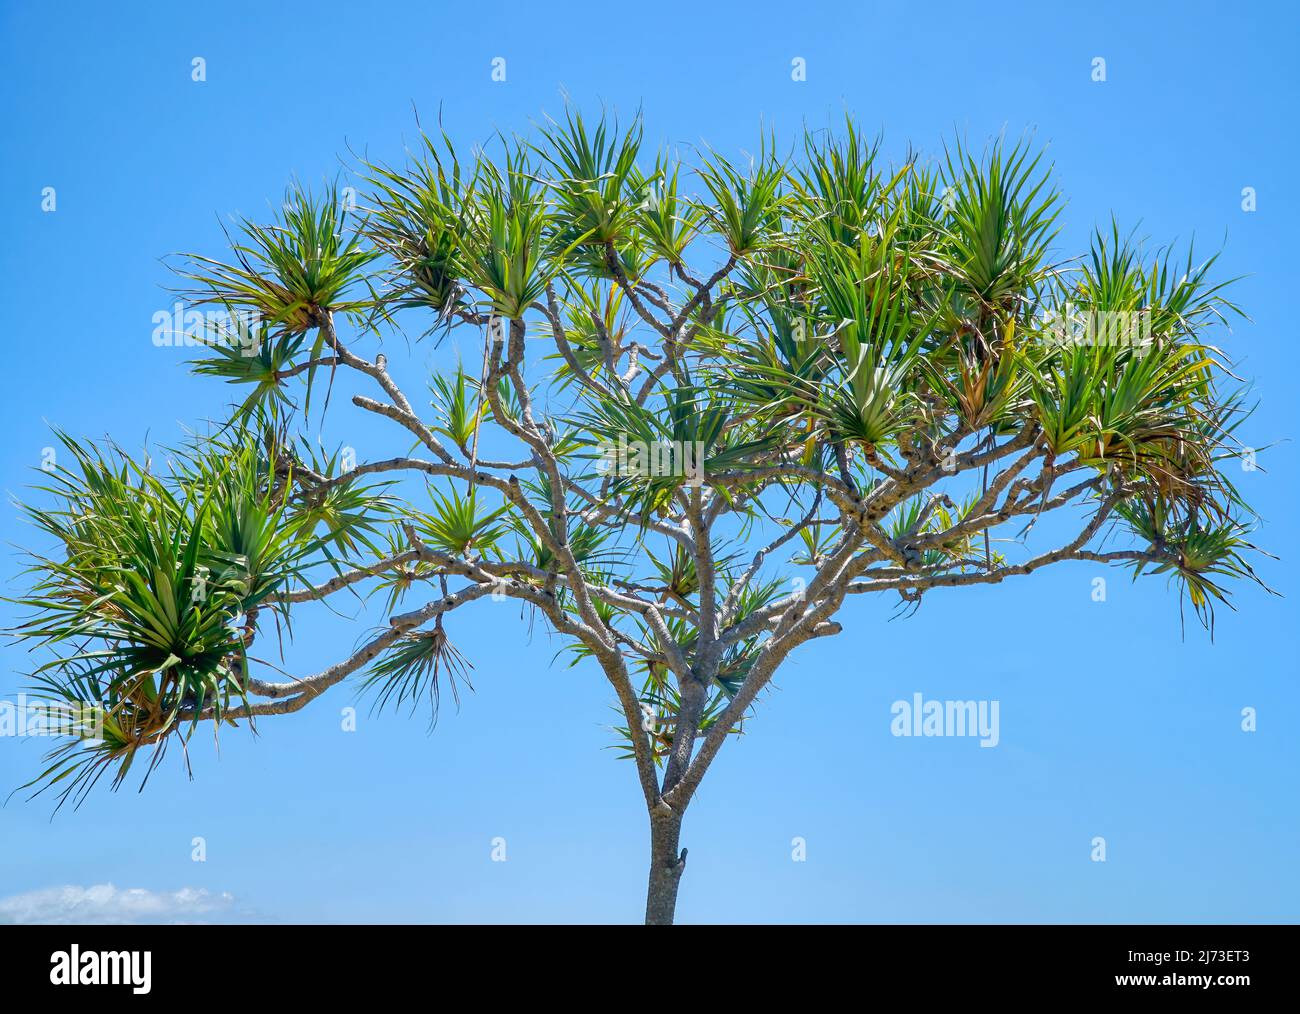 pandanus palms or ScrewPine tree, close up view with a blue background Stock Photo